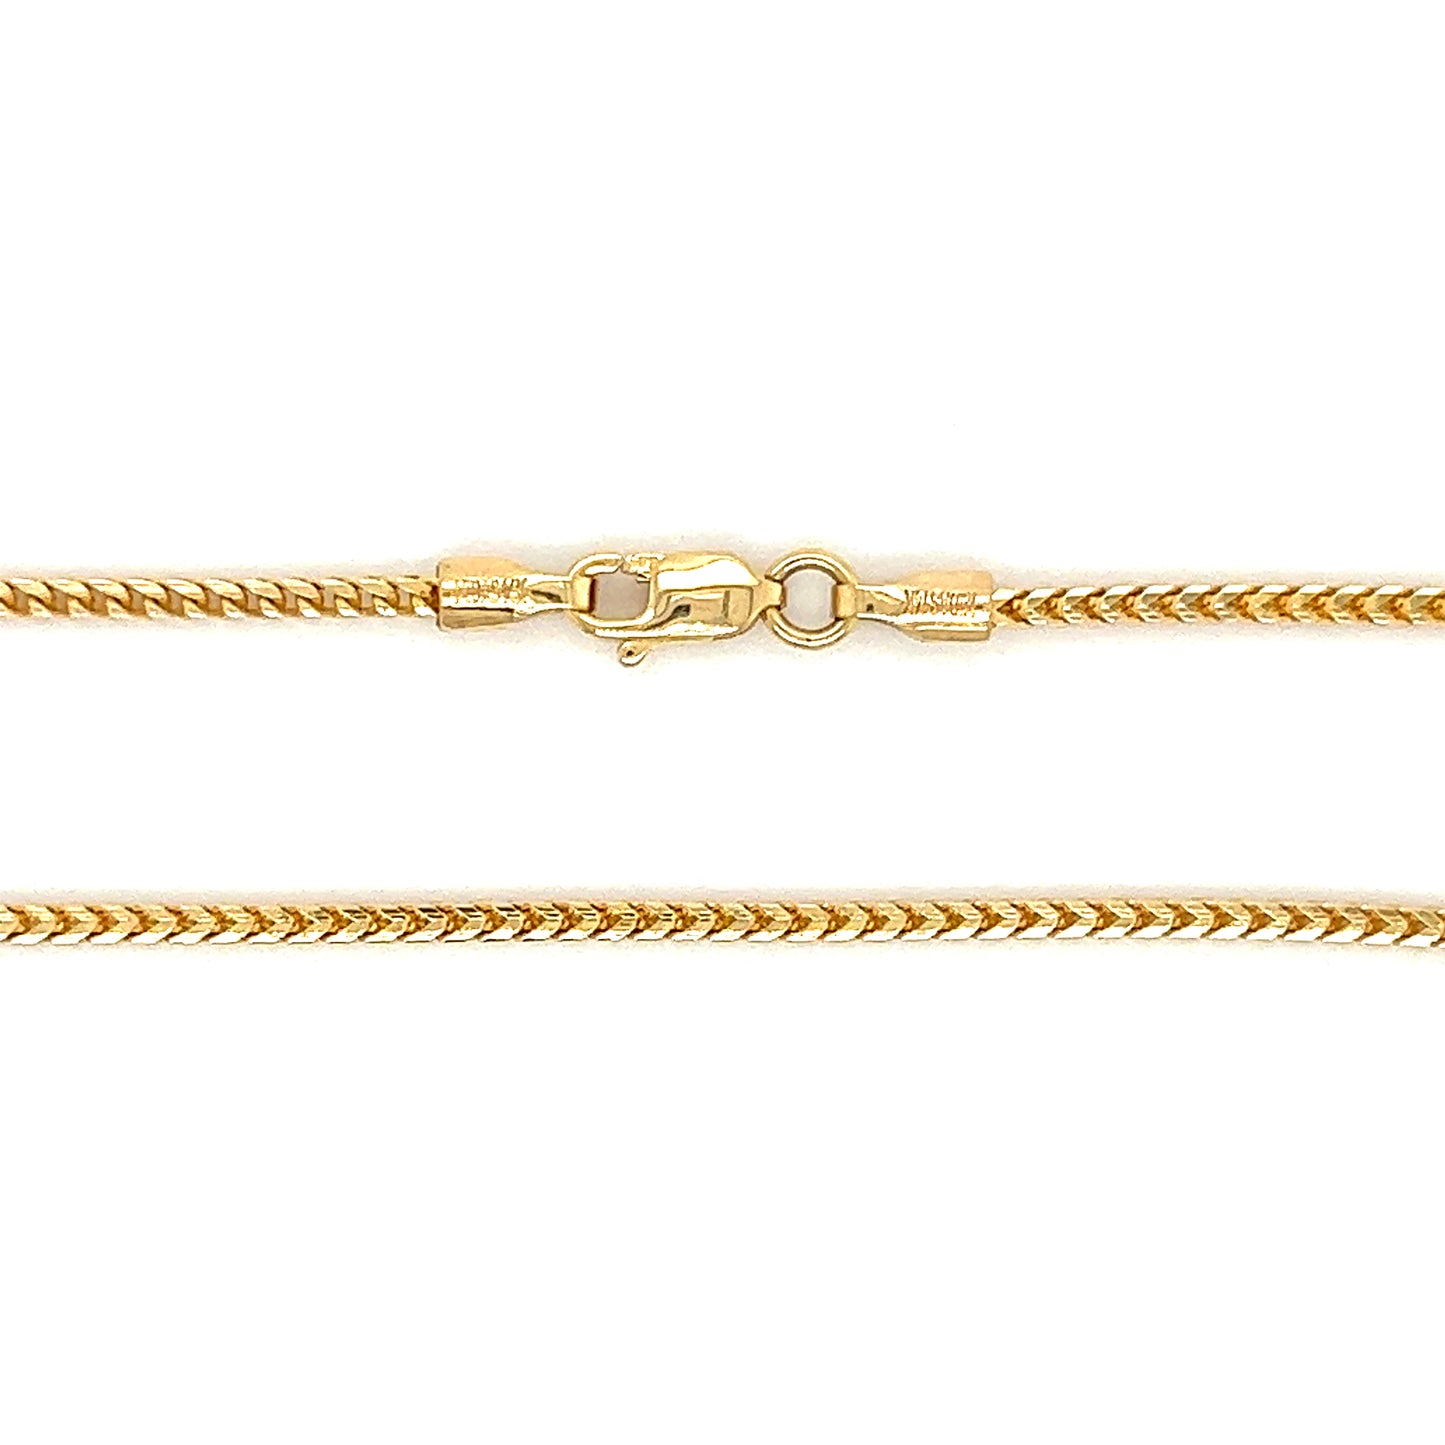 Franco 1.55mm Chain with 24in Length in 14K Yellow Gold Chain and Clasp View